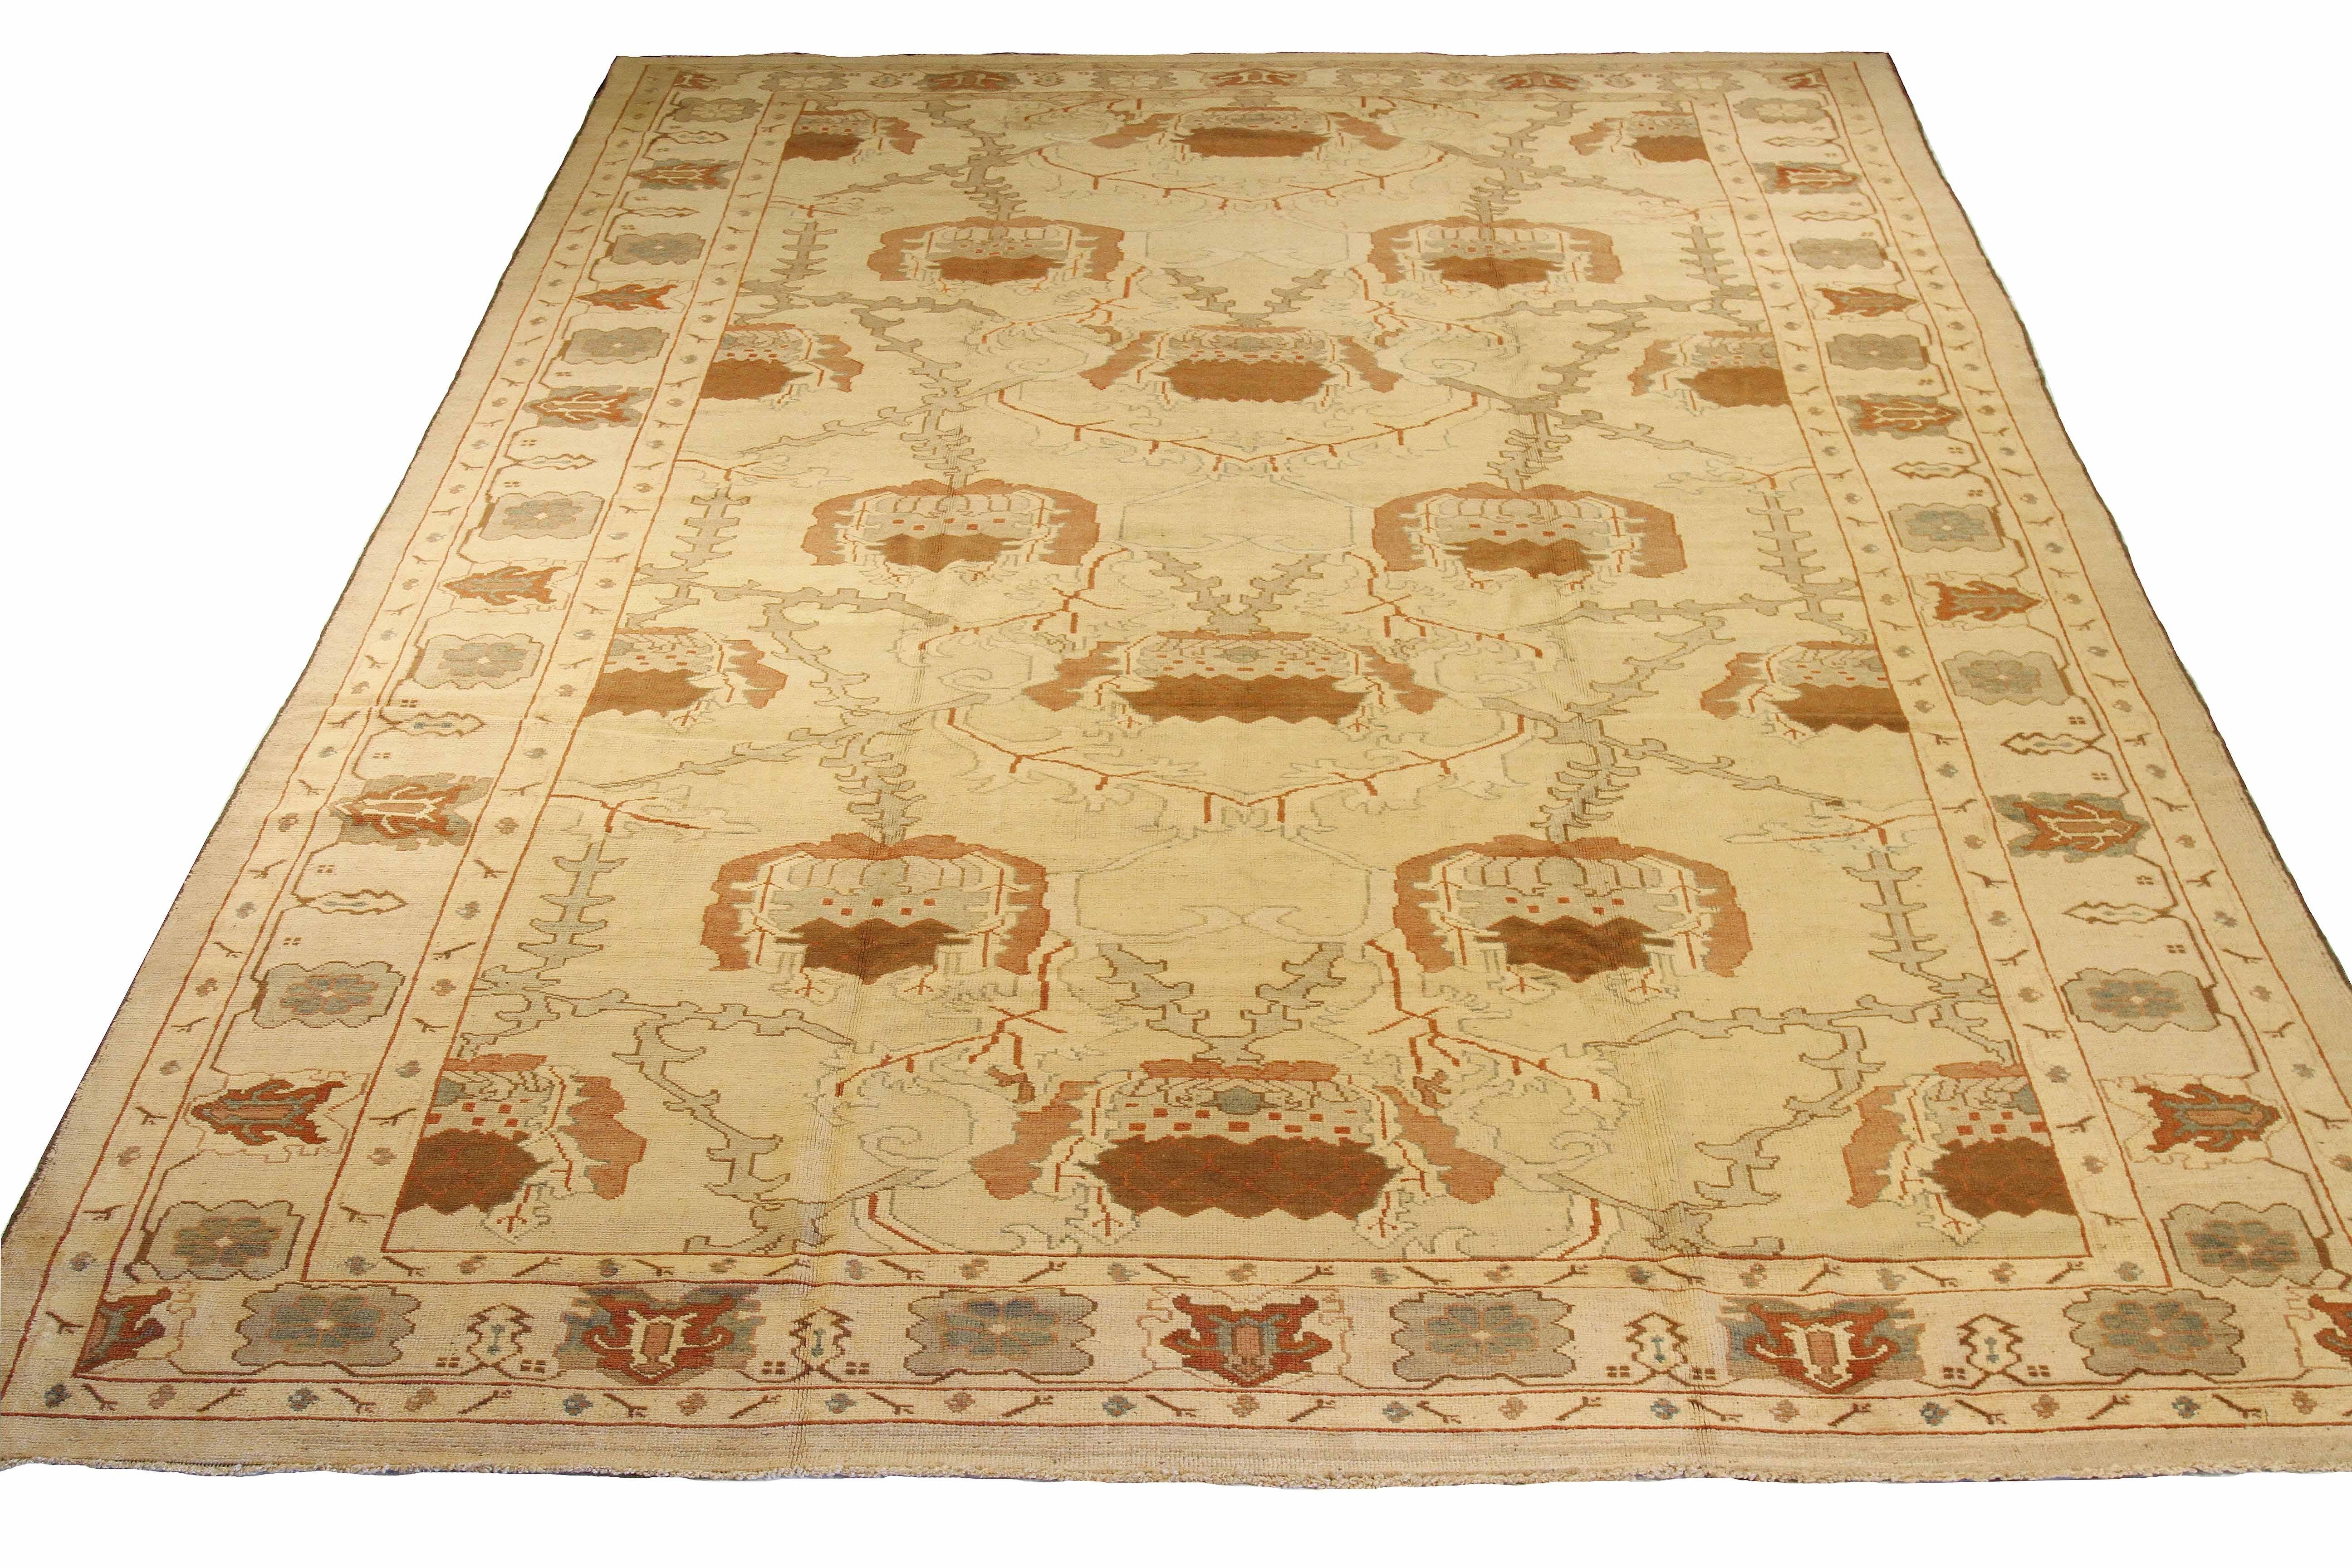 Large and oversized handmade Turkish rug from high-quality sheep’s wool and colored with eco-friendly vegetable dyes that are proven safe for humans and pets alike. It’s a Donegal design showcasing an ivory field with gray and brown botanical